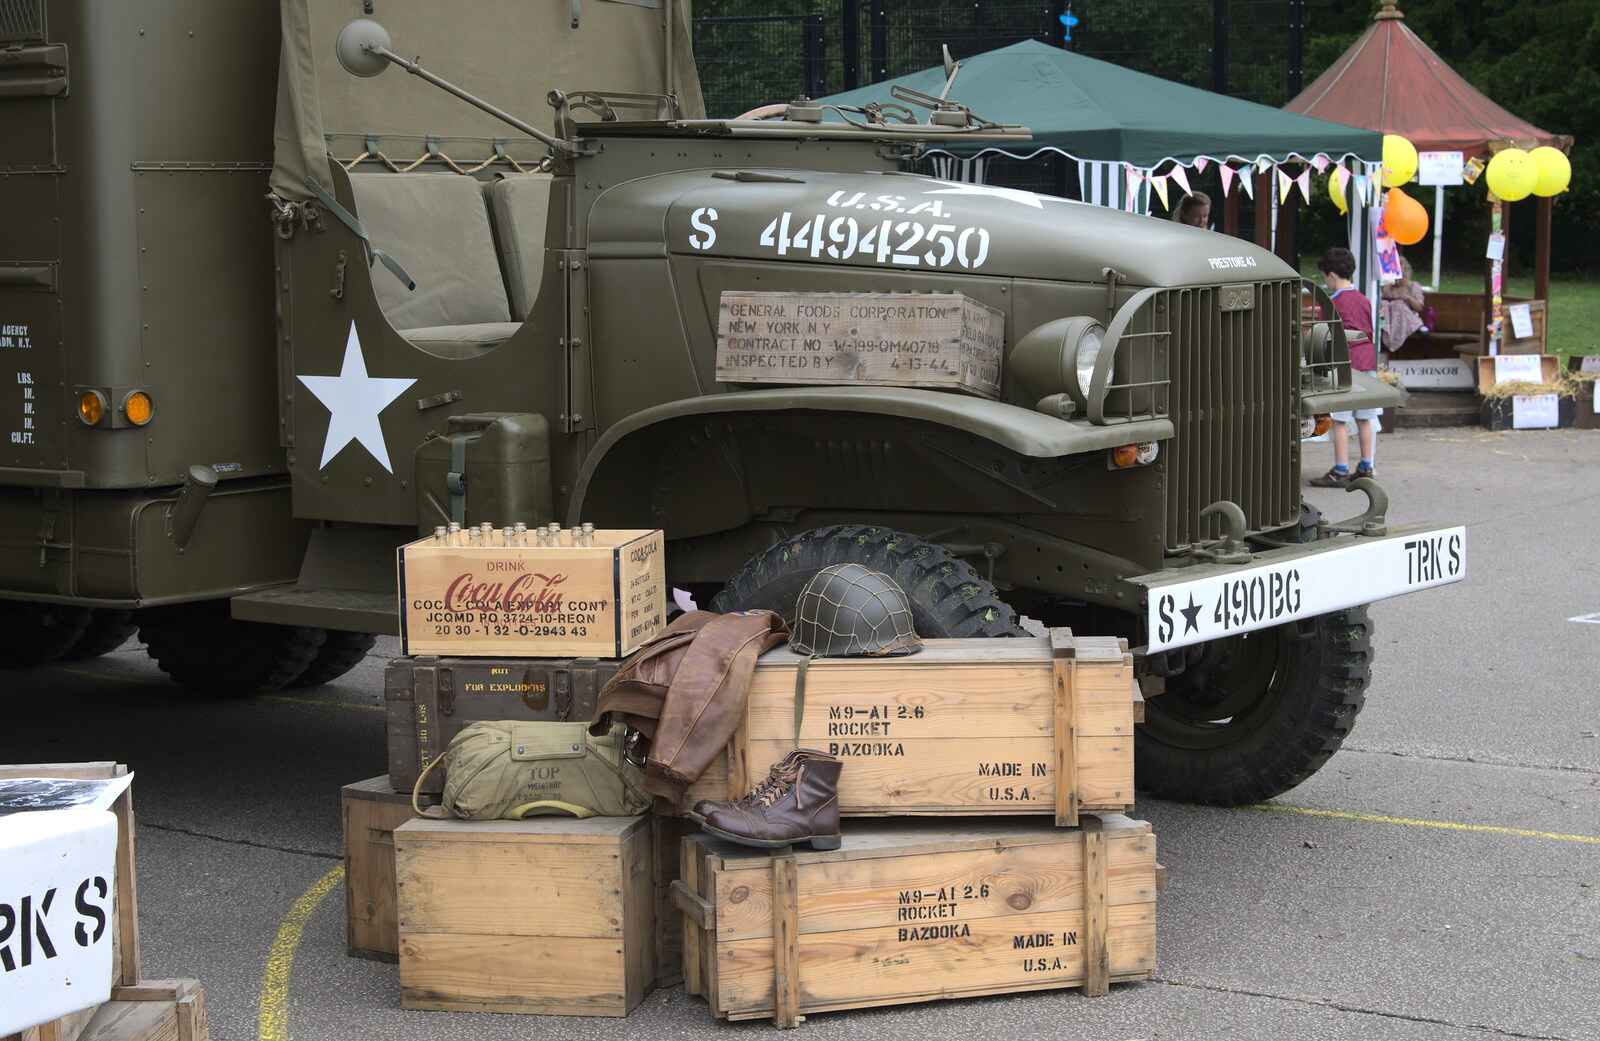 Chickens' truck and some bazooka boxes from St. Peter and St. Paul's School Summer Fete, Eye, Suffolk - 12th July 2014